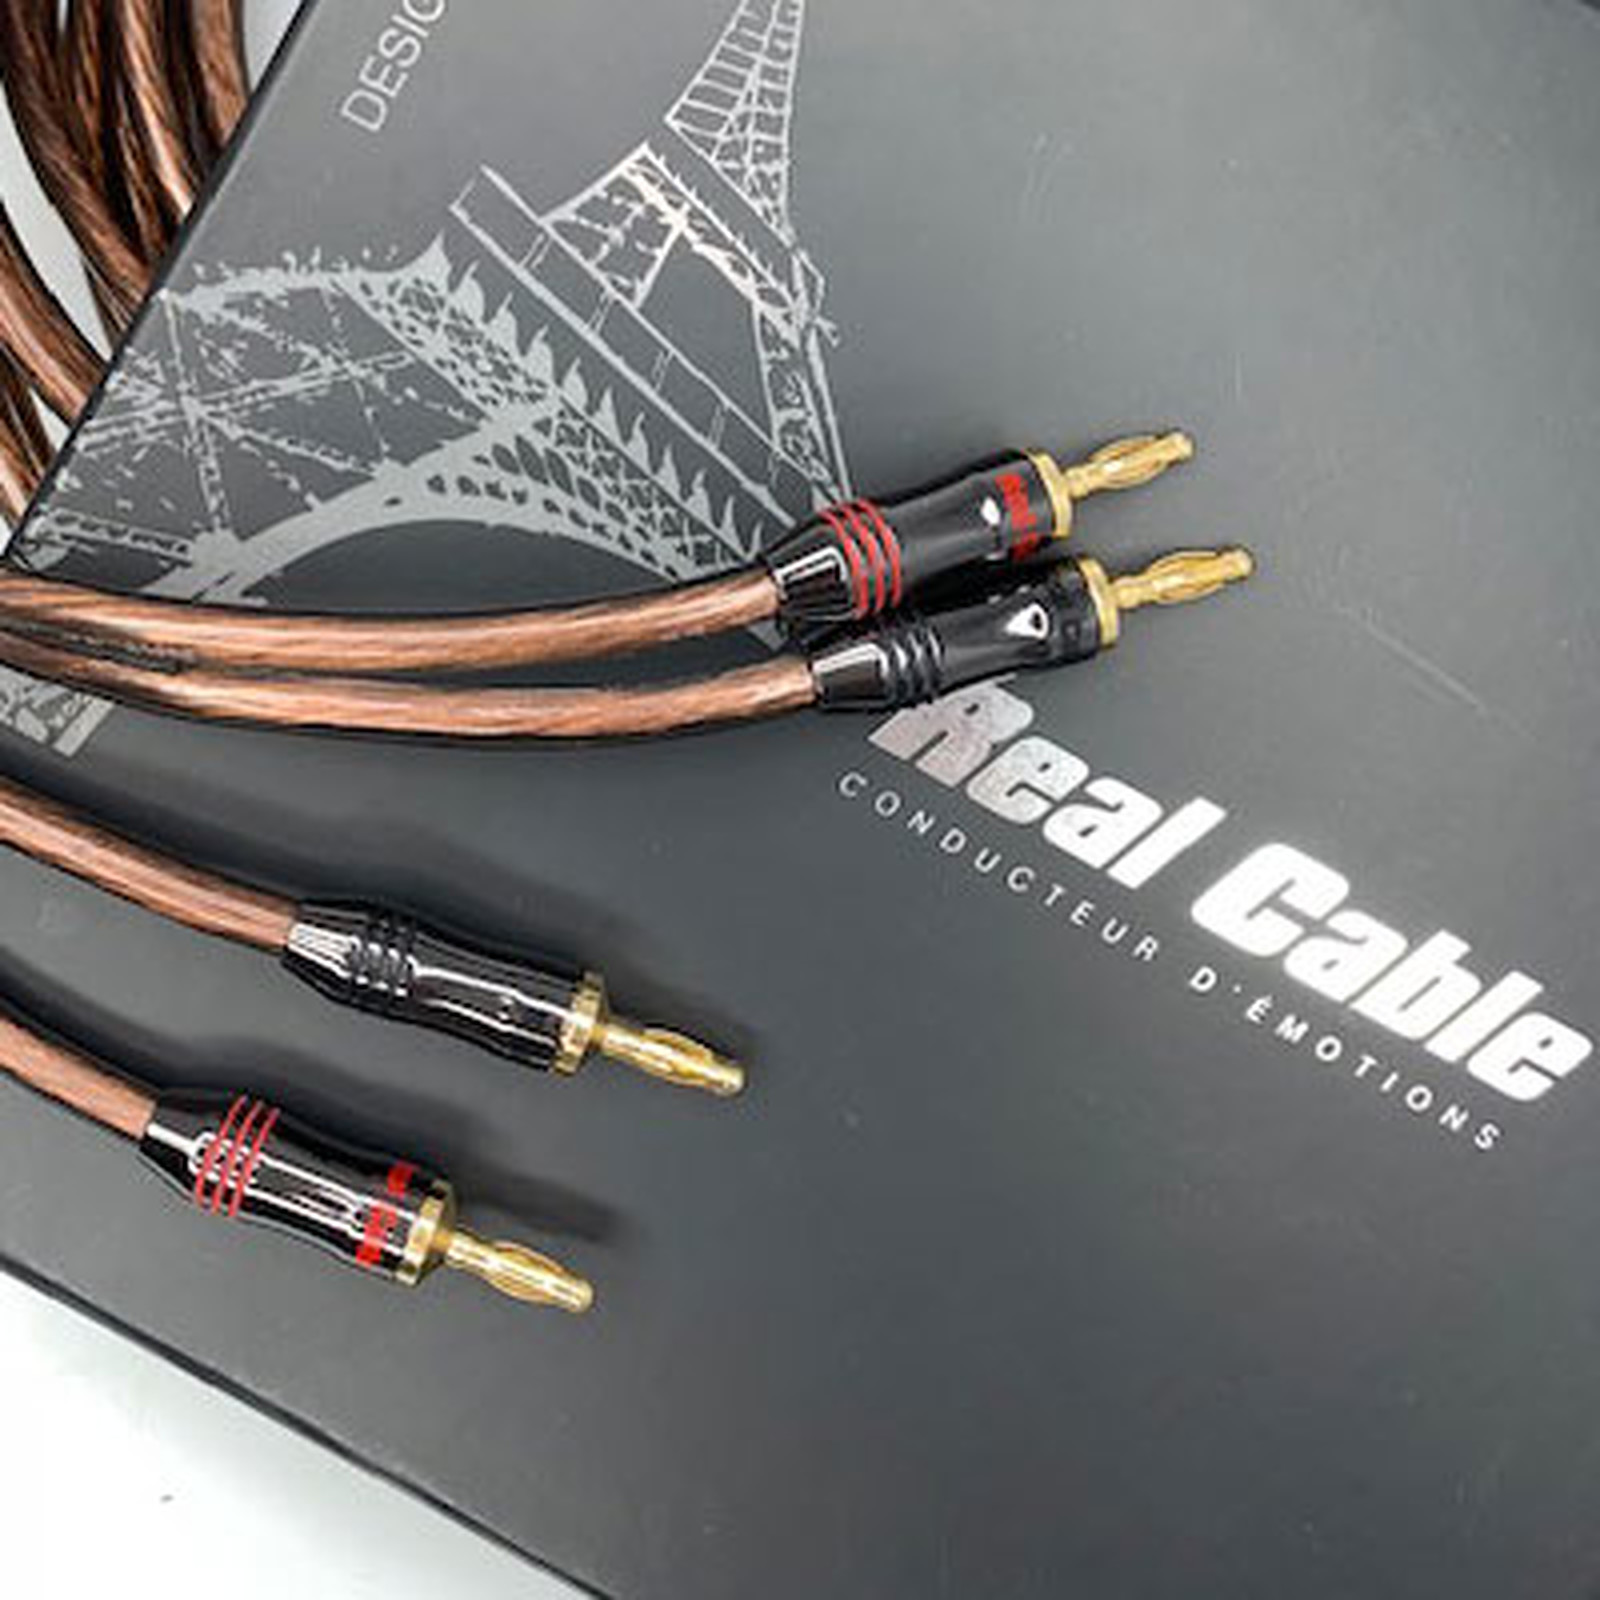 Real Cable Elite 300 (2x5m) - Cable haute qualite Real Cable